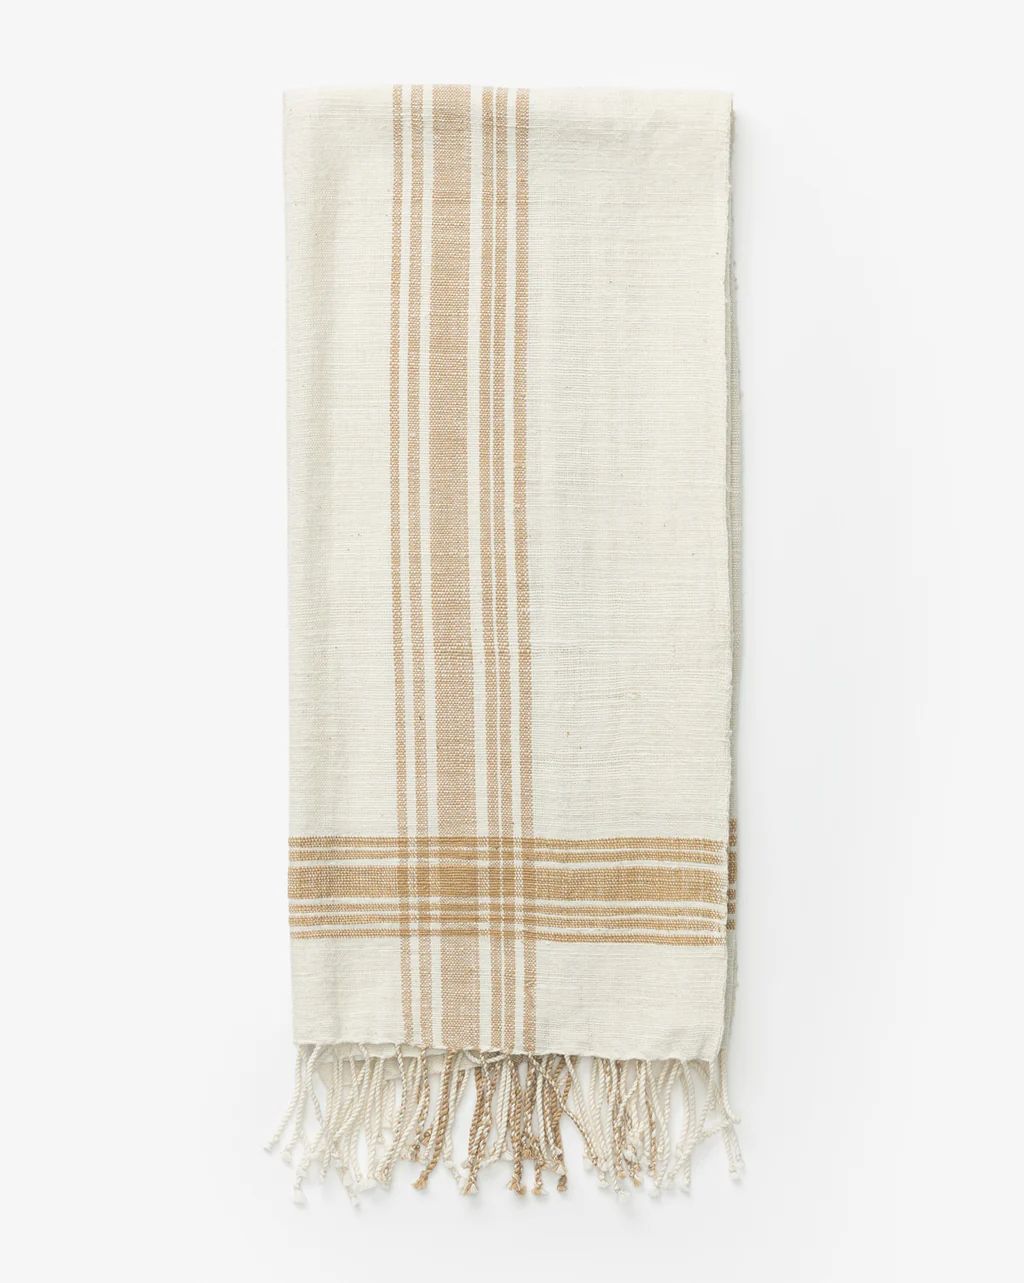 Hyde Hatch Hand Towel | McGee & Co.